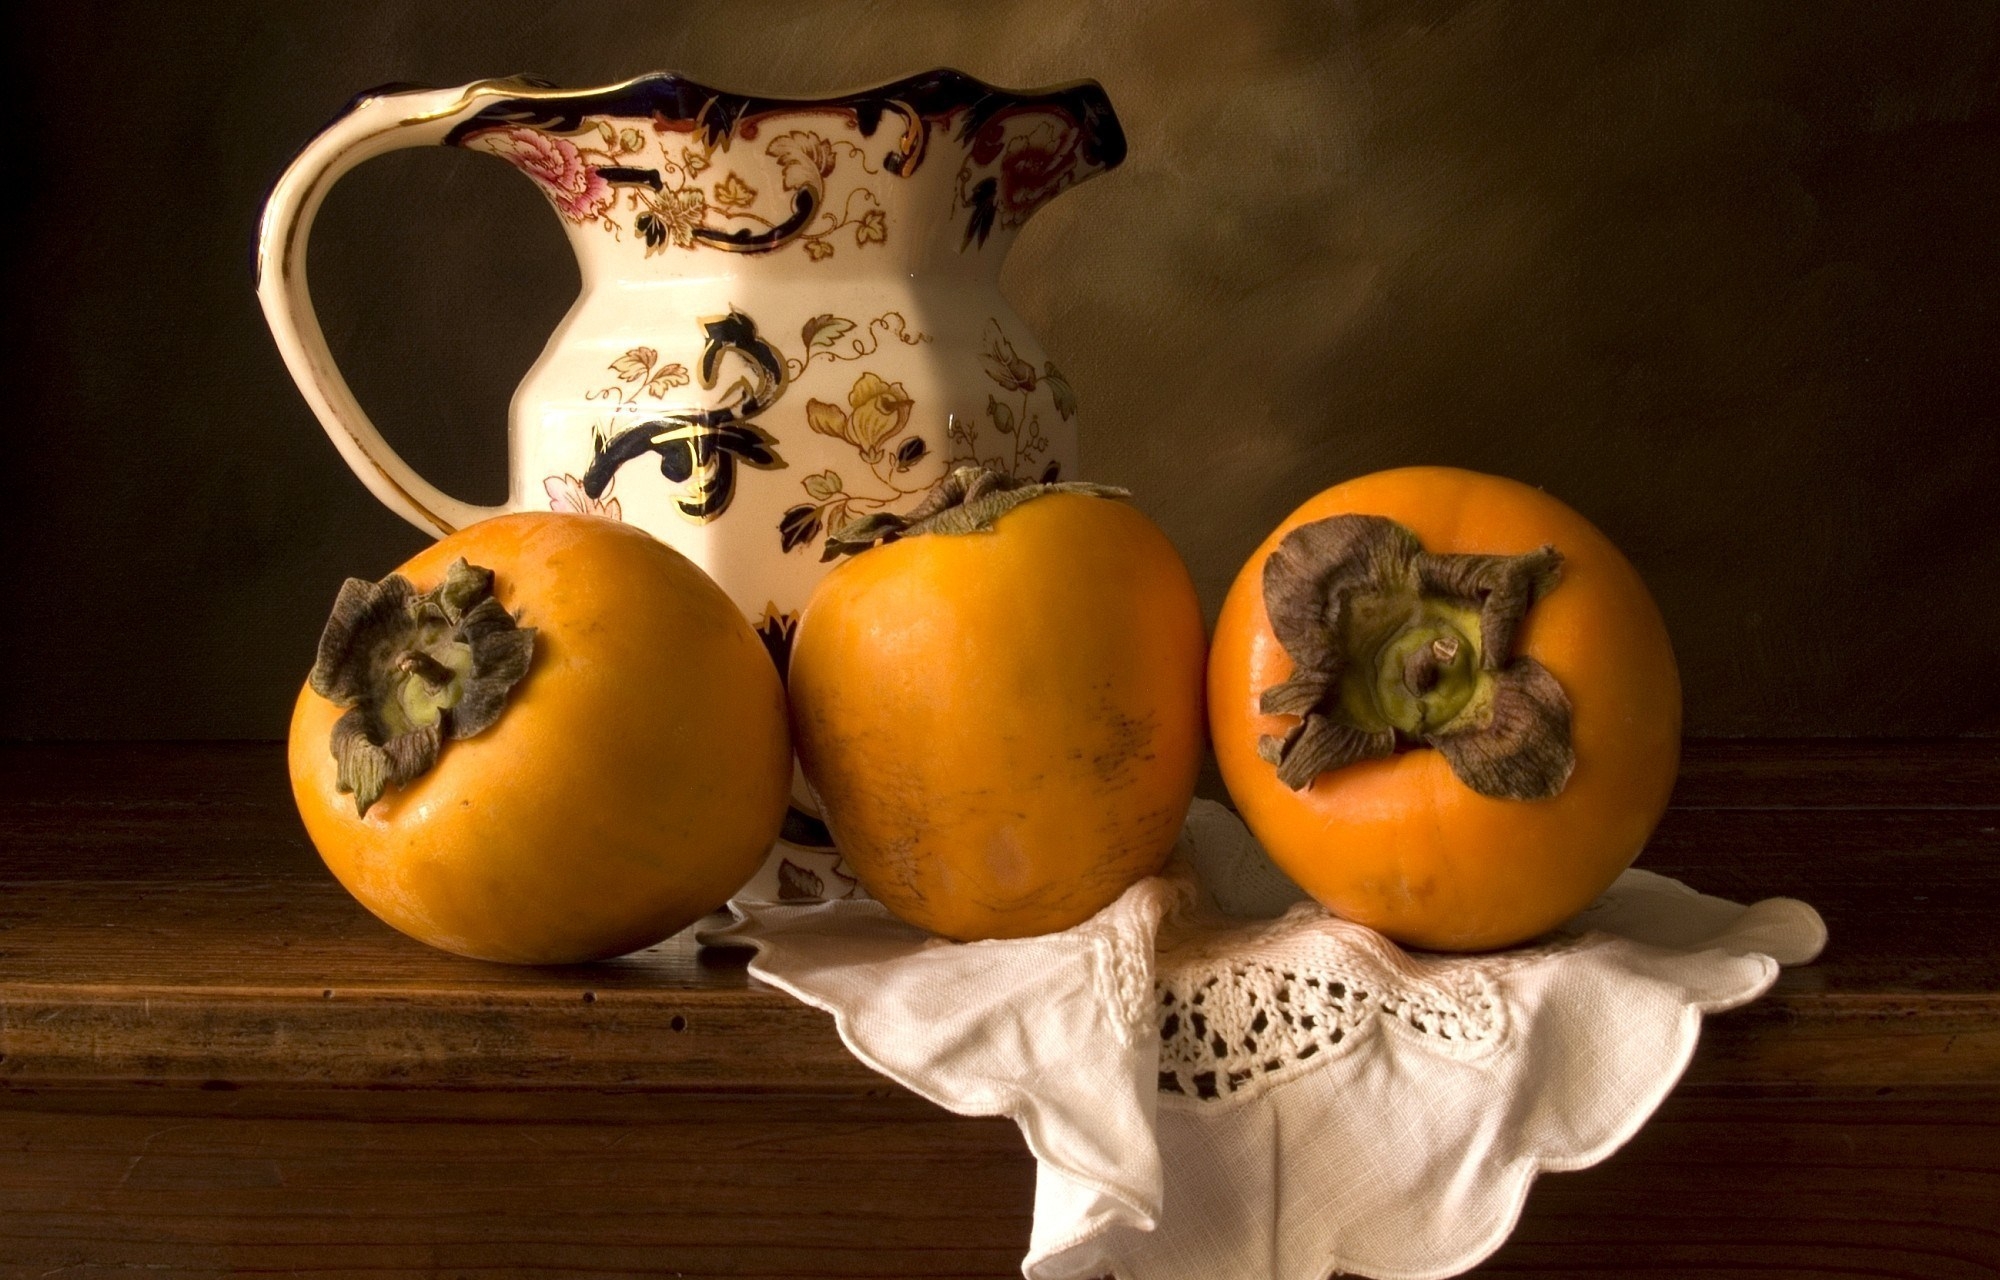 Cool Backgrounds food, decanter, persimmon, carafe Still Life